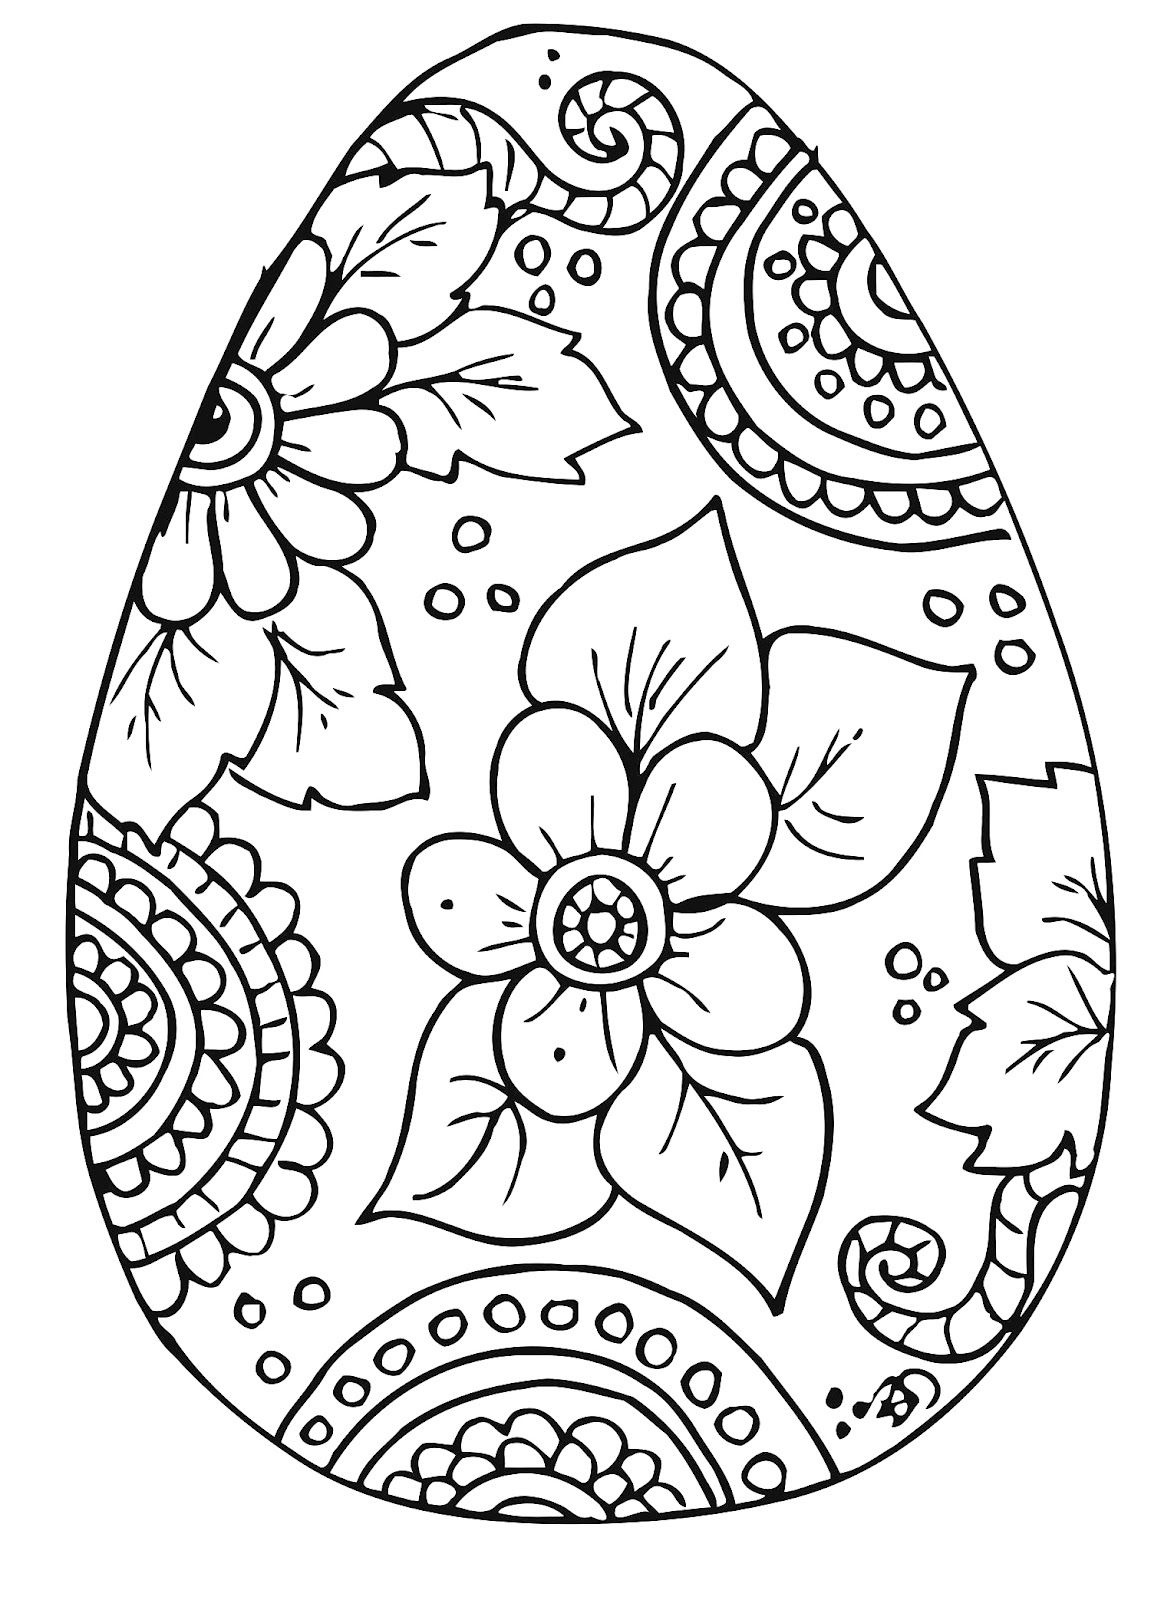 10 Cool Free Printable Easter Coloring Pages For Kids Who've Moved - Free Printable Easter Coloring Pages